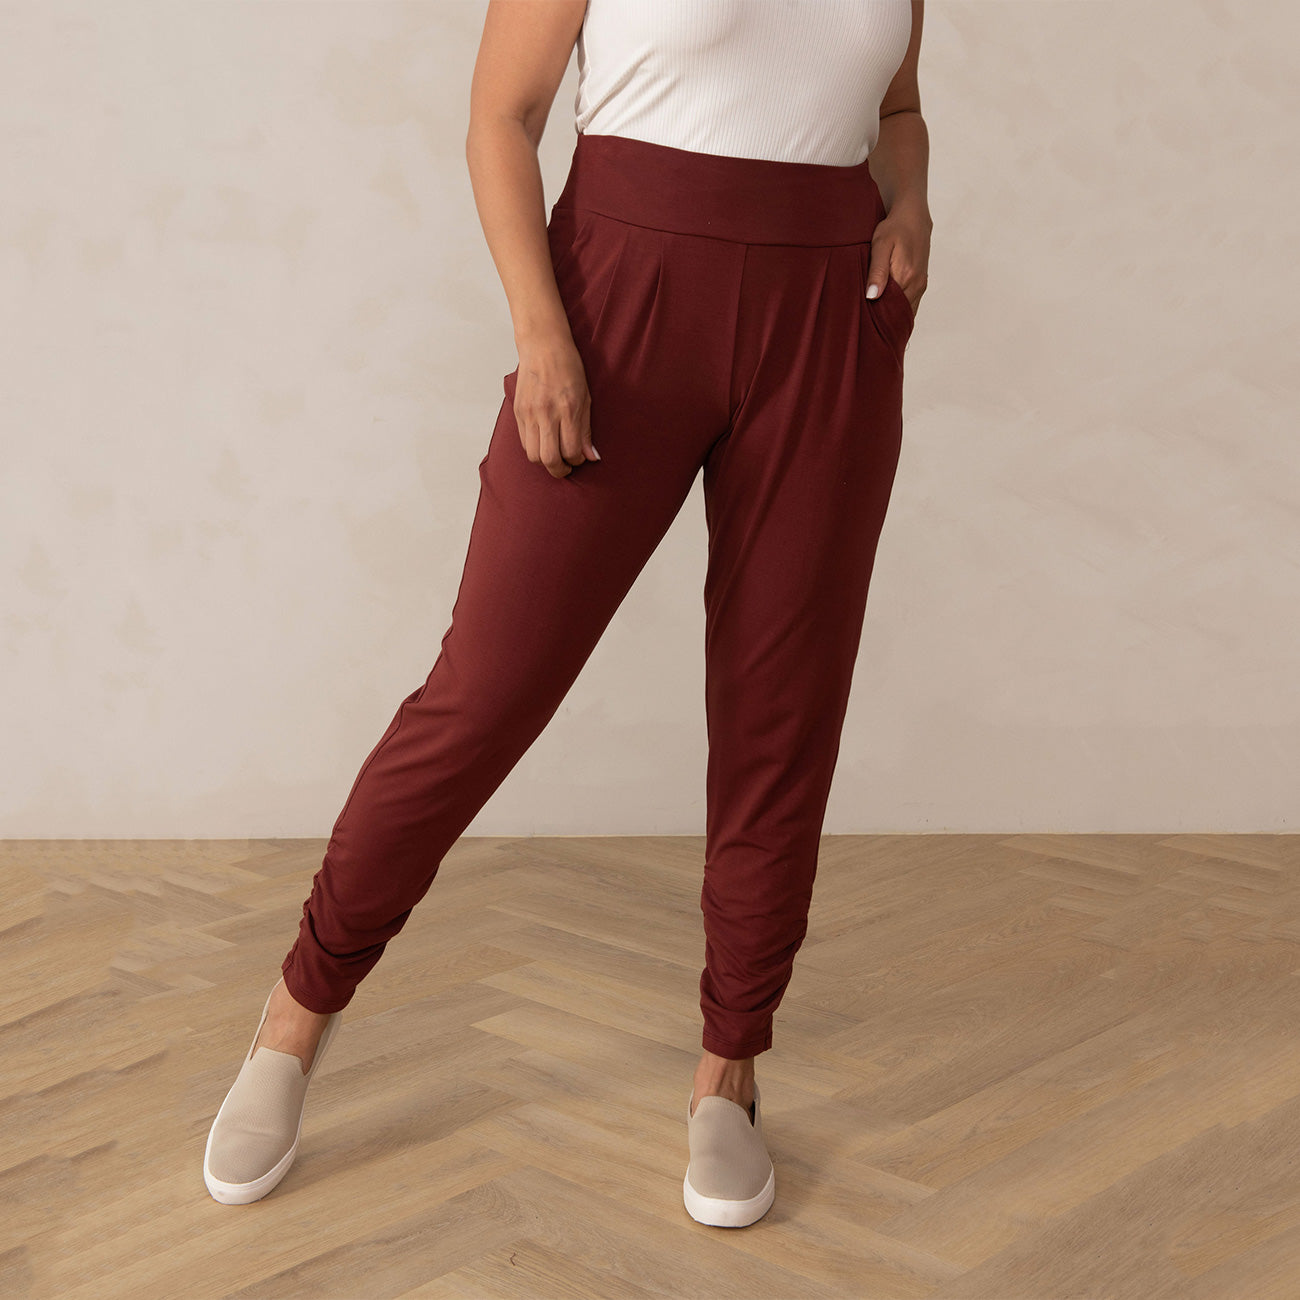 How To Wear Dressy Sweatpants - Encircled The Dressy Sweatpant Review - TDF  LIFE & STYLE